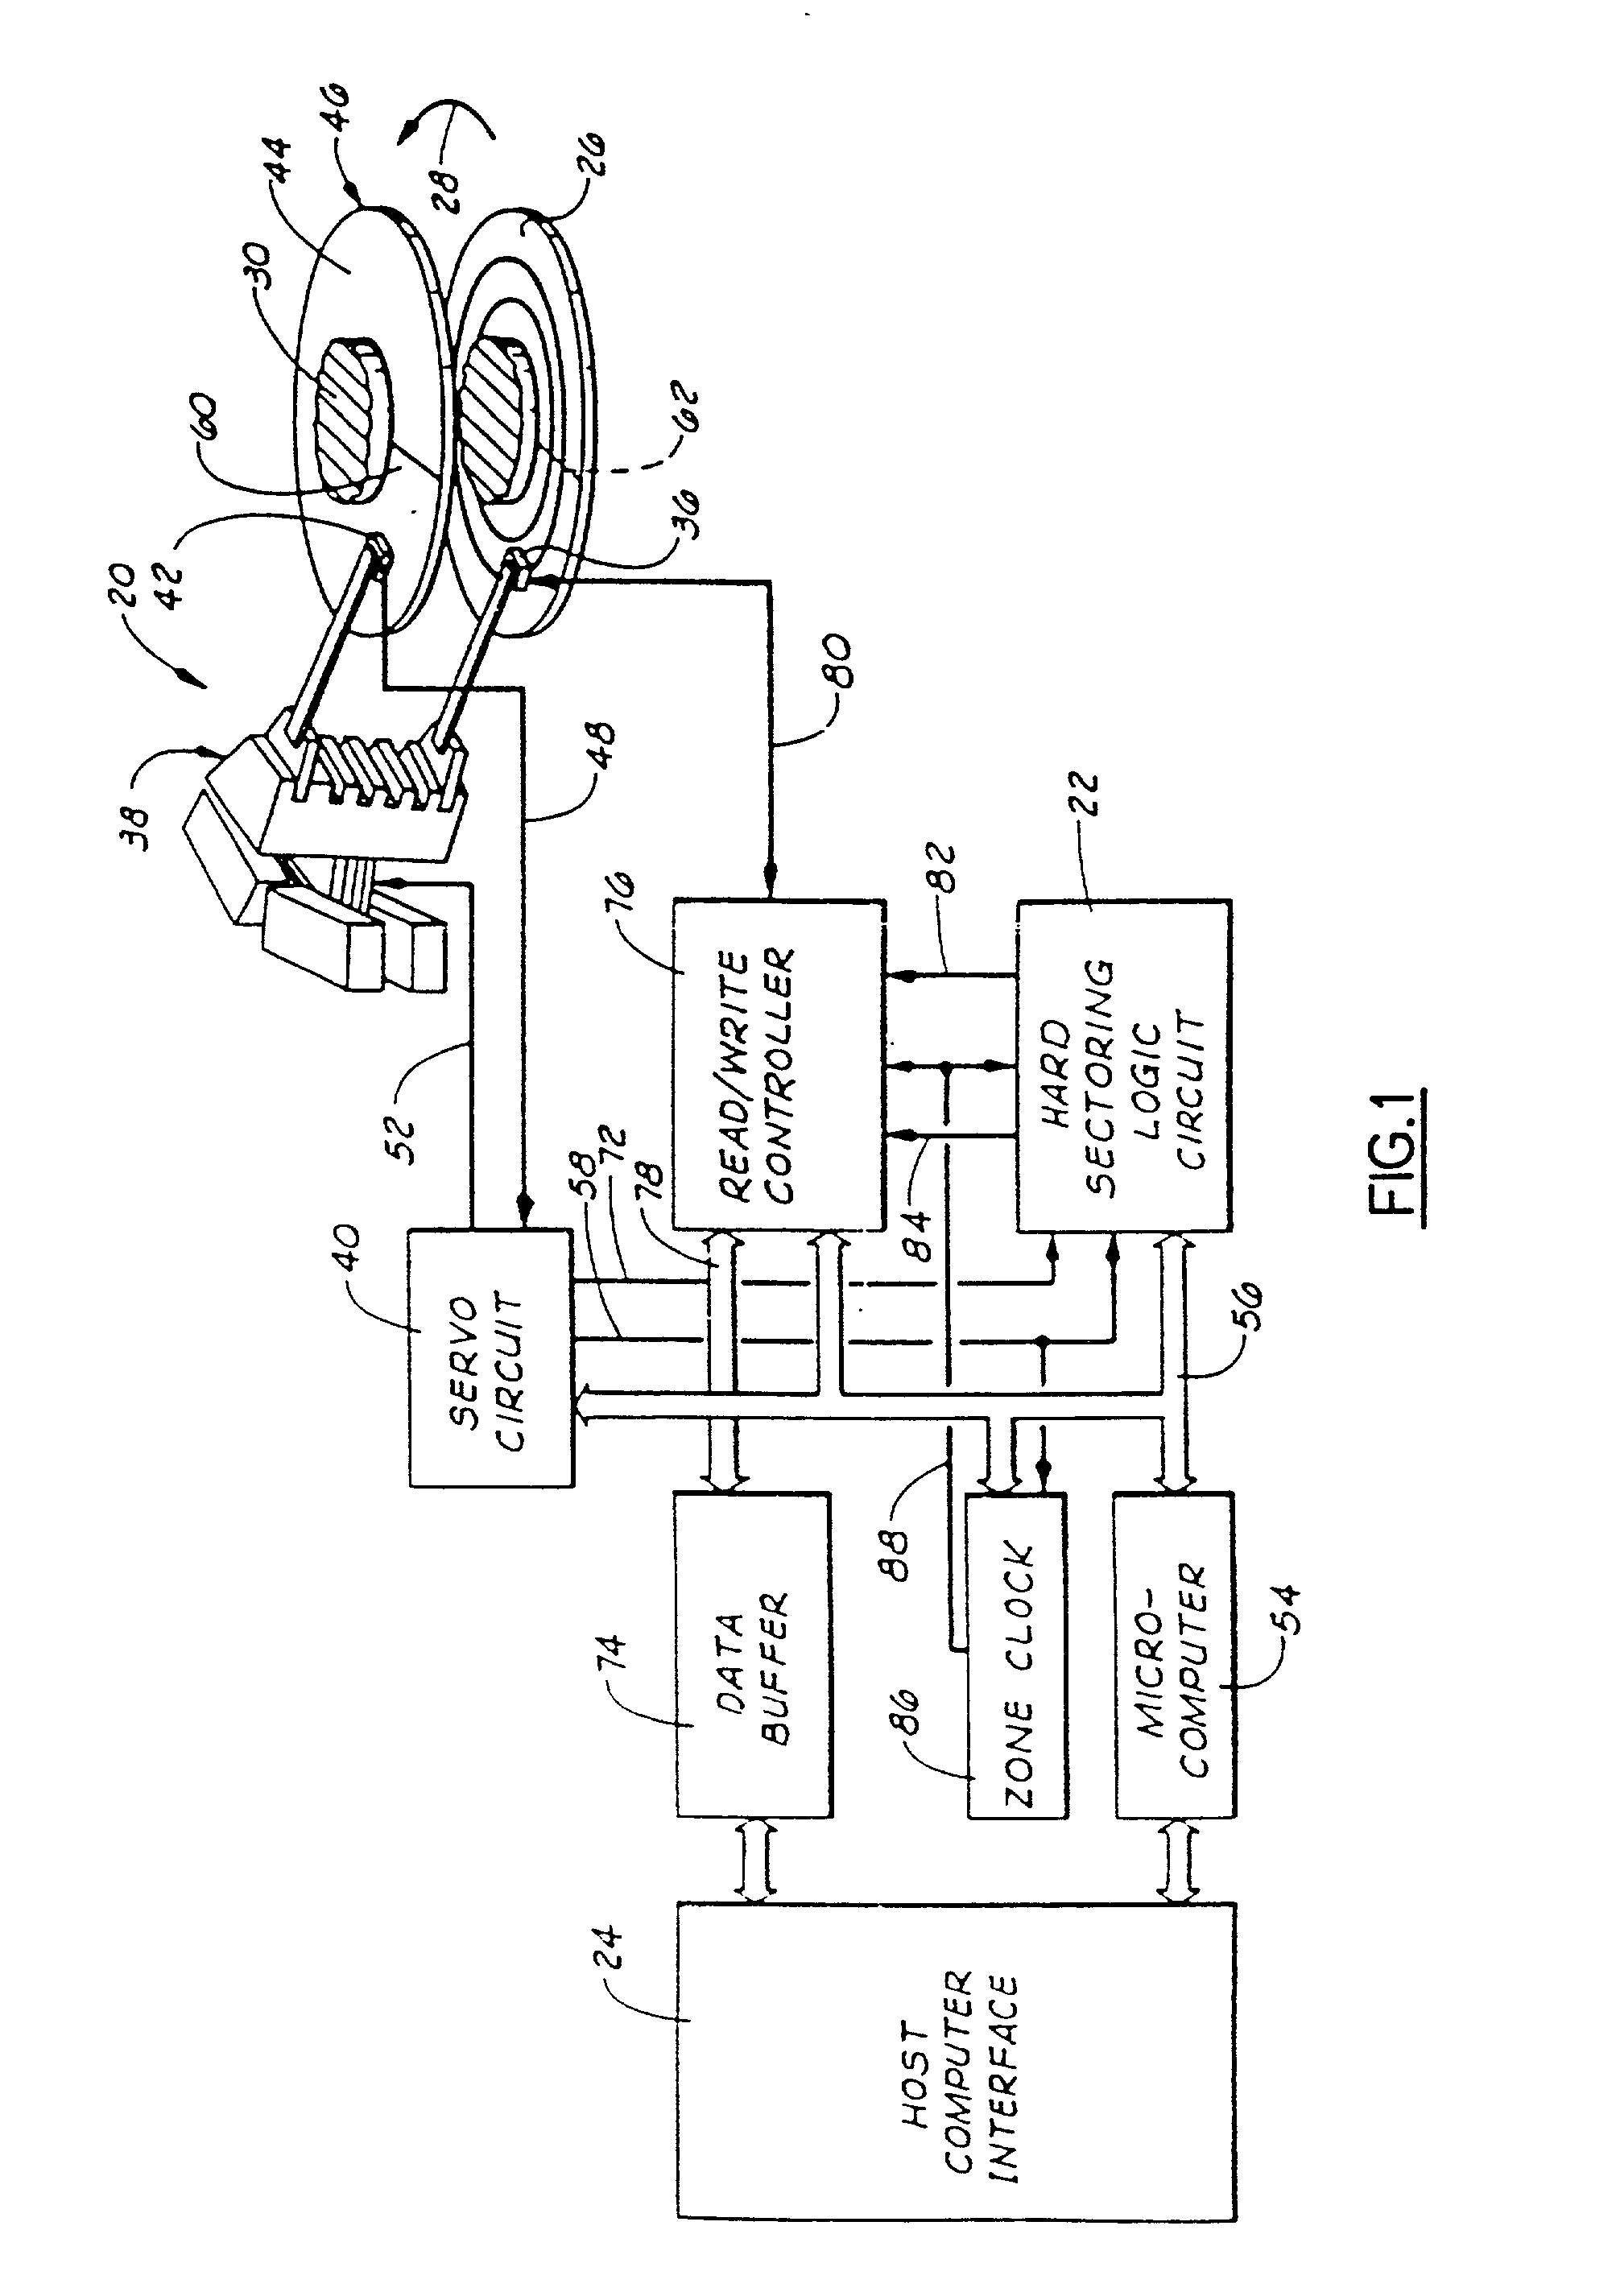 Hard sectoring circuit and method for a rotating disk data storage device